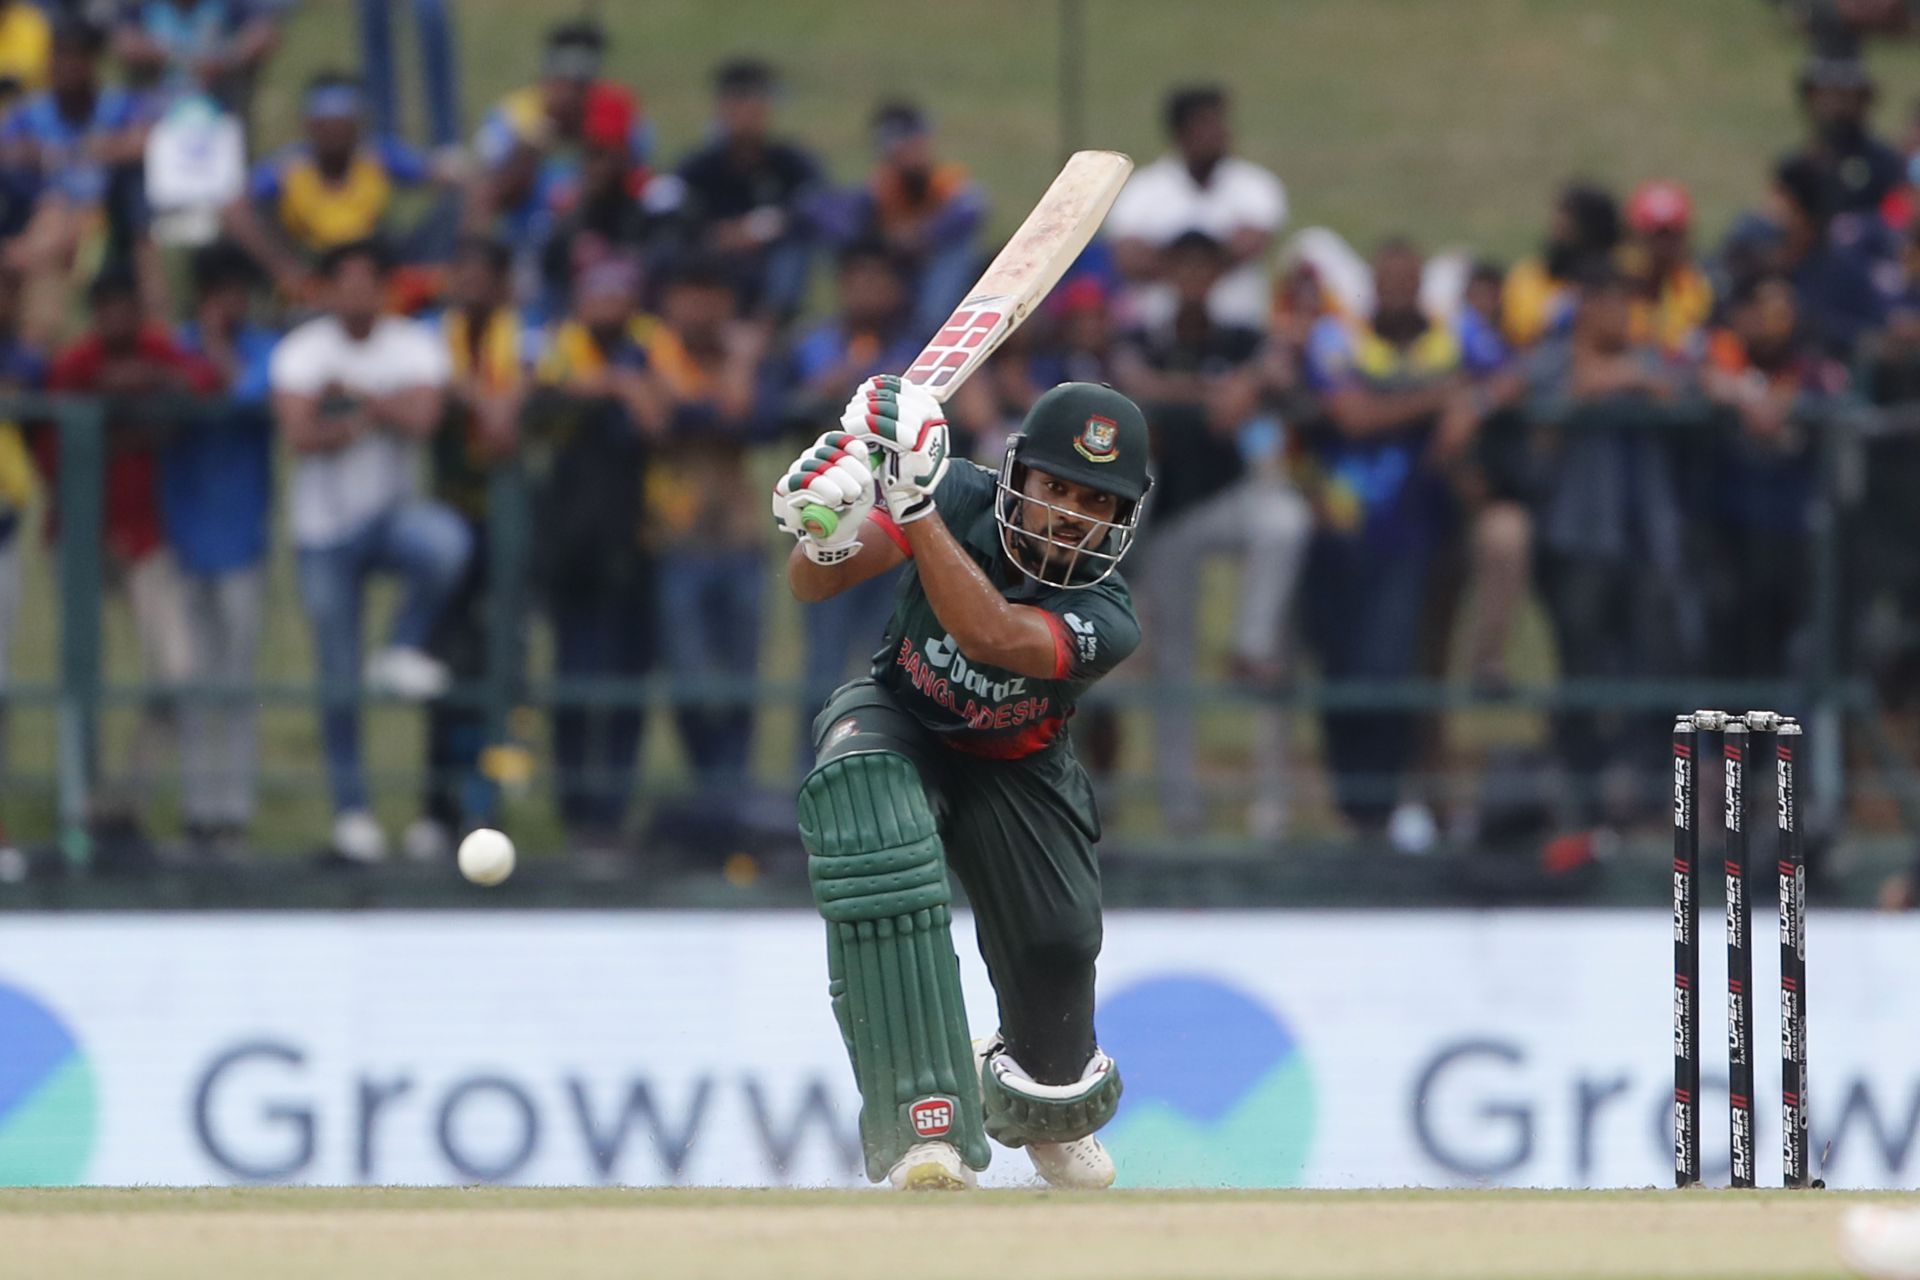 Najmul Hossain Shanto suffered a hamstring injury during the Asia Cup. (Pic: Getty Images)